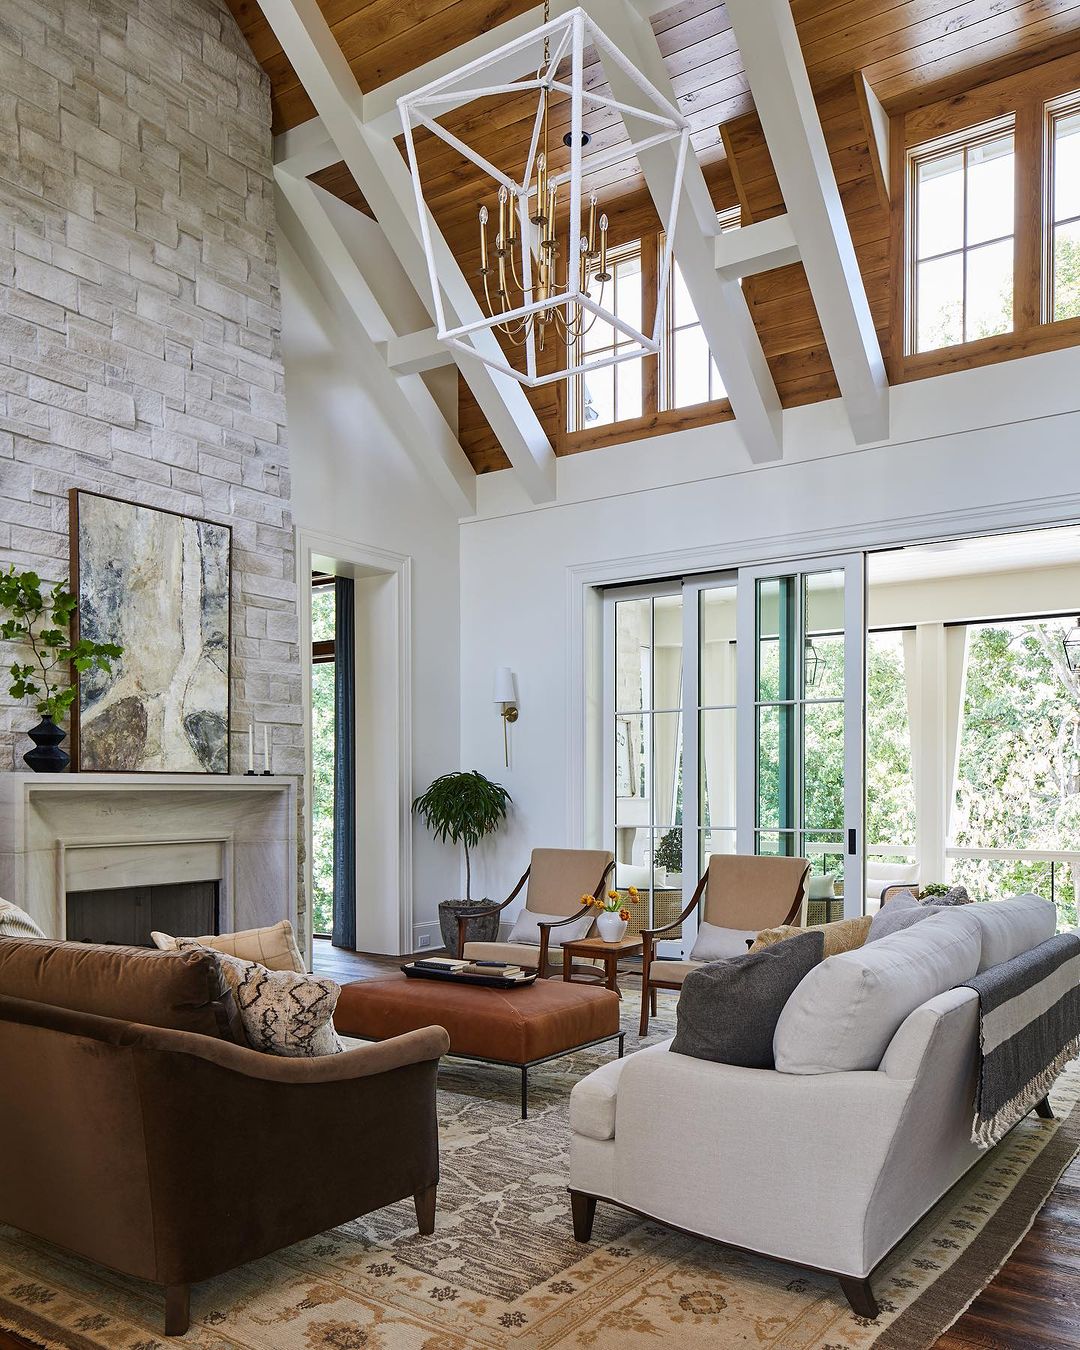 Creative Beams and Shiplap for a Dynamic Living Space